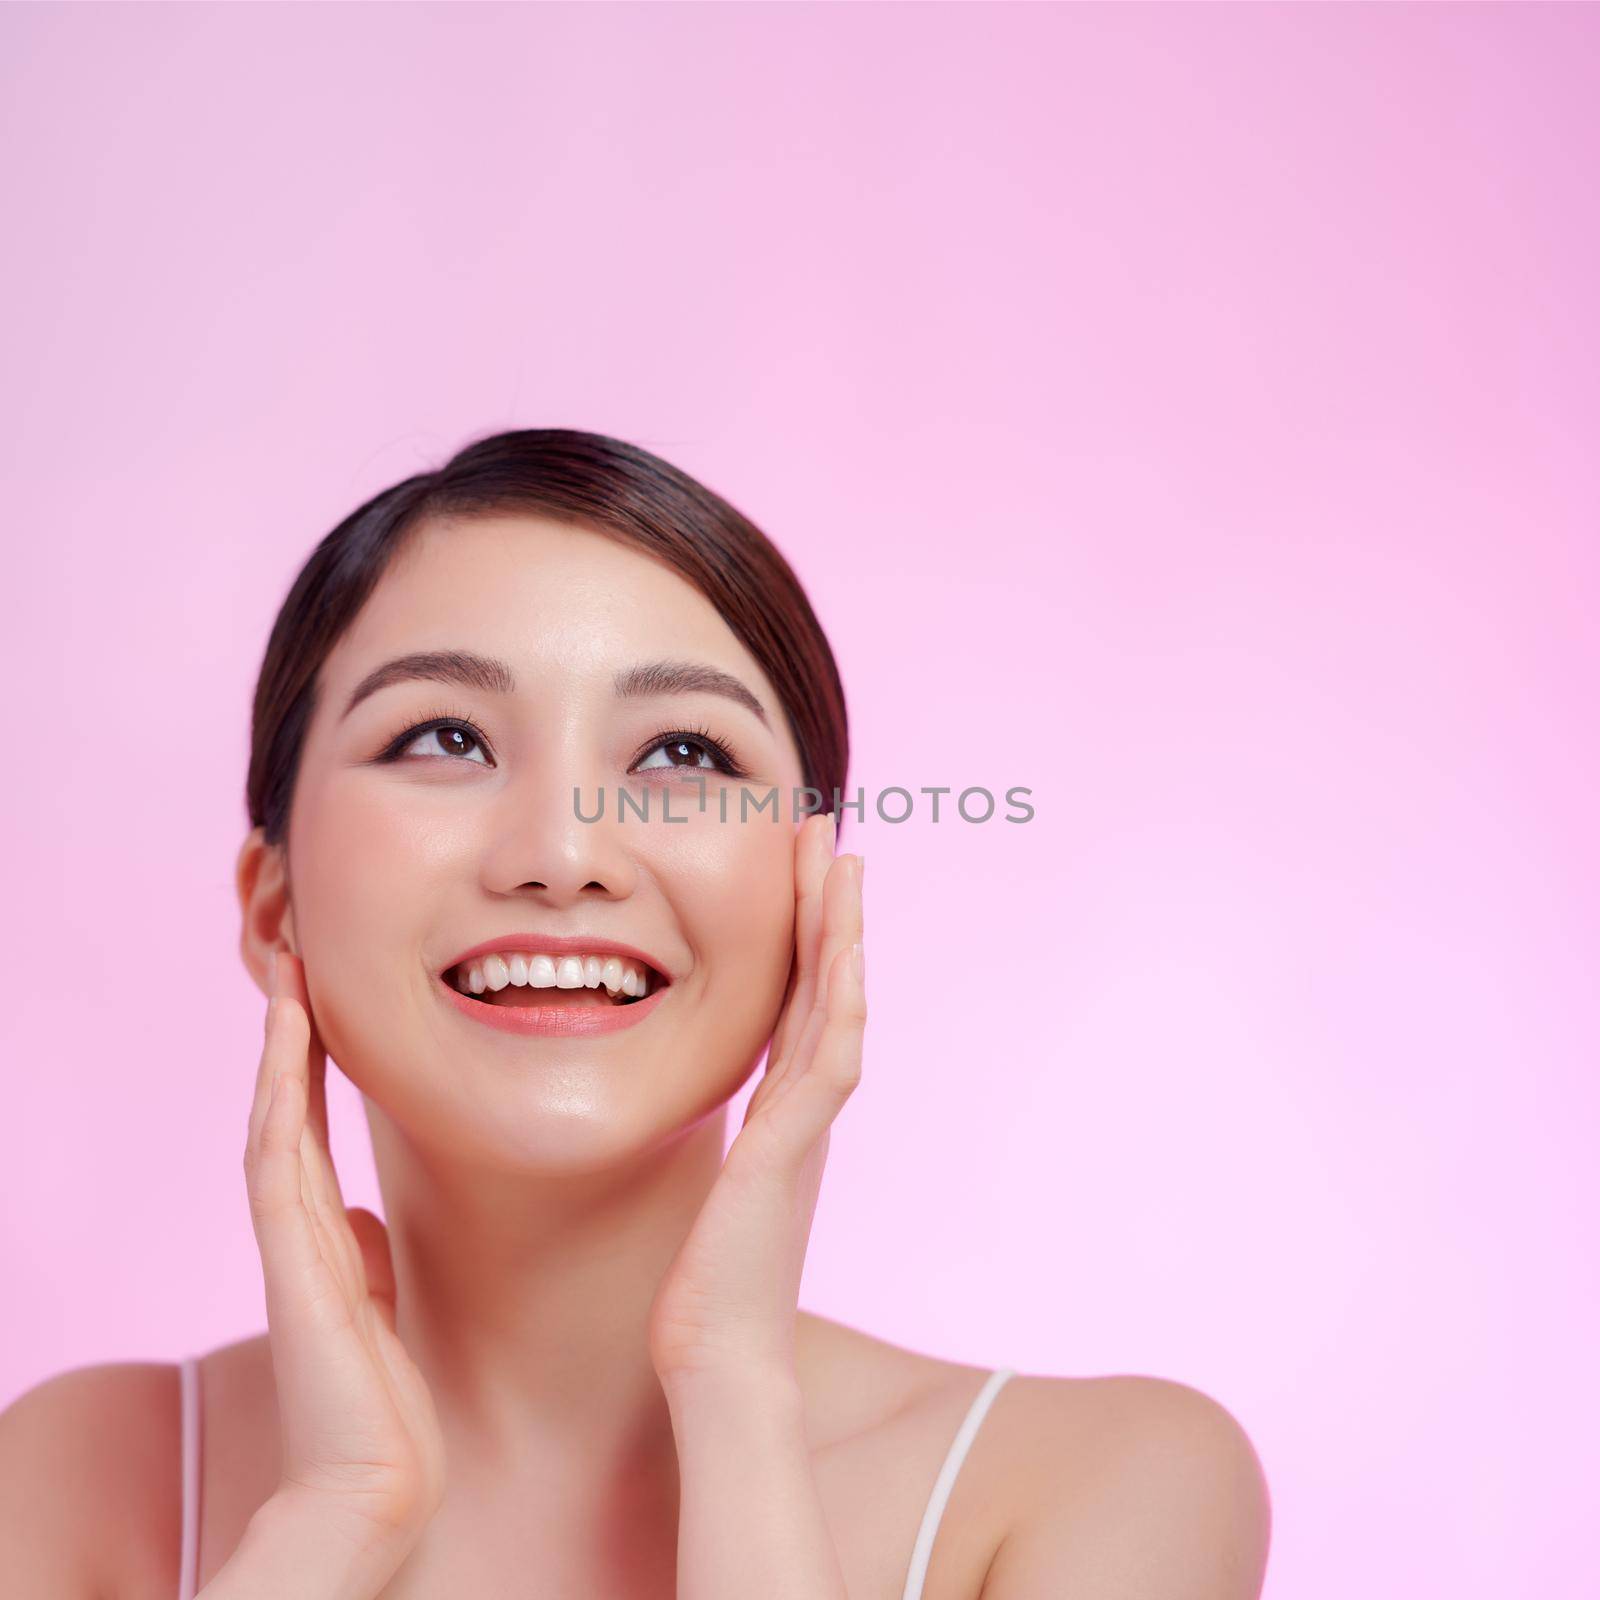 Woman close-up beauty portrait hands touching face on pink background by makidotvn